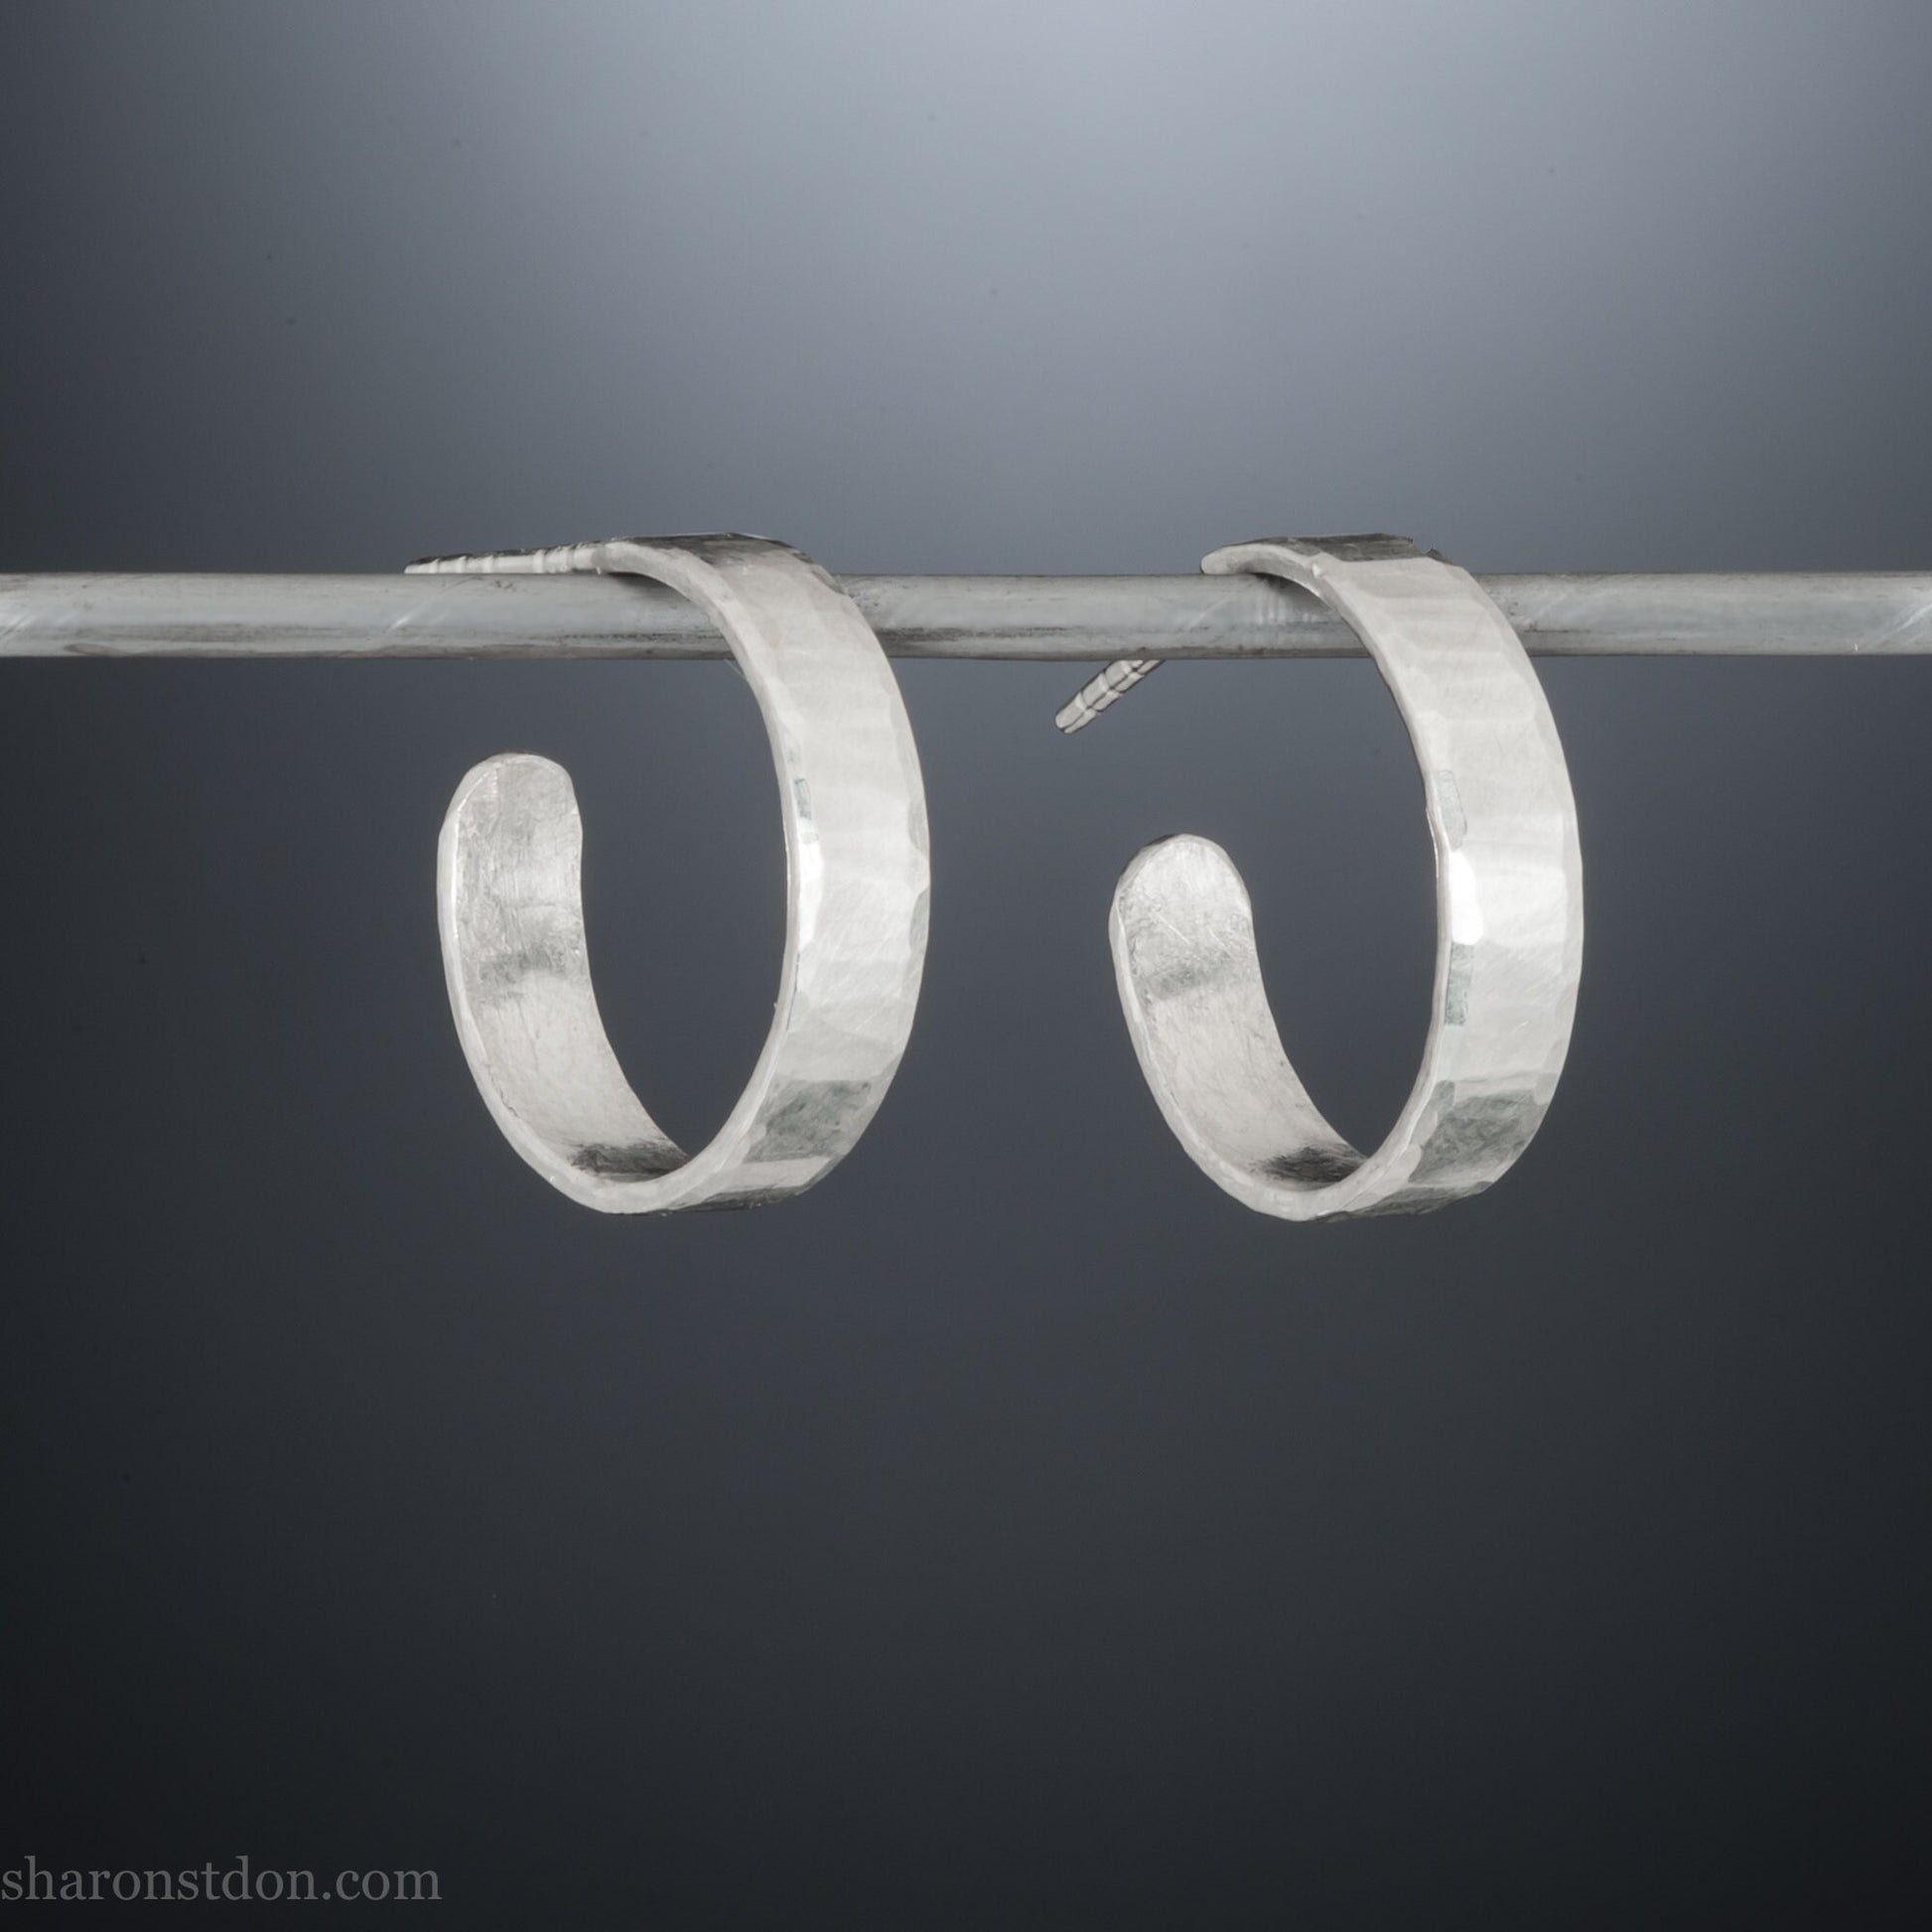 925 sterling silver hoop earrings handmade in North America by Sharon SaintDon. 18mm diameter round, 4mm wide, hammered texture, matte, brushed finish and silver posts and backs.